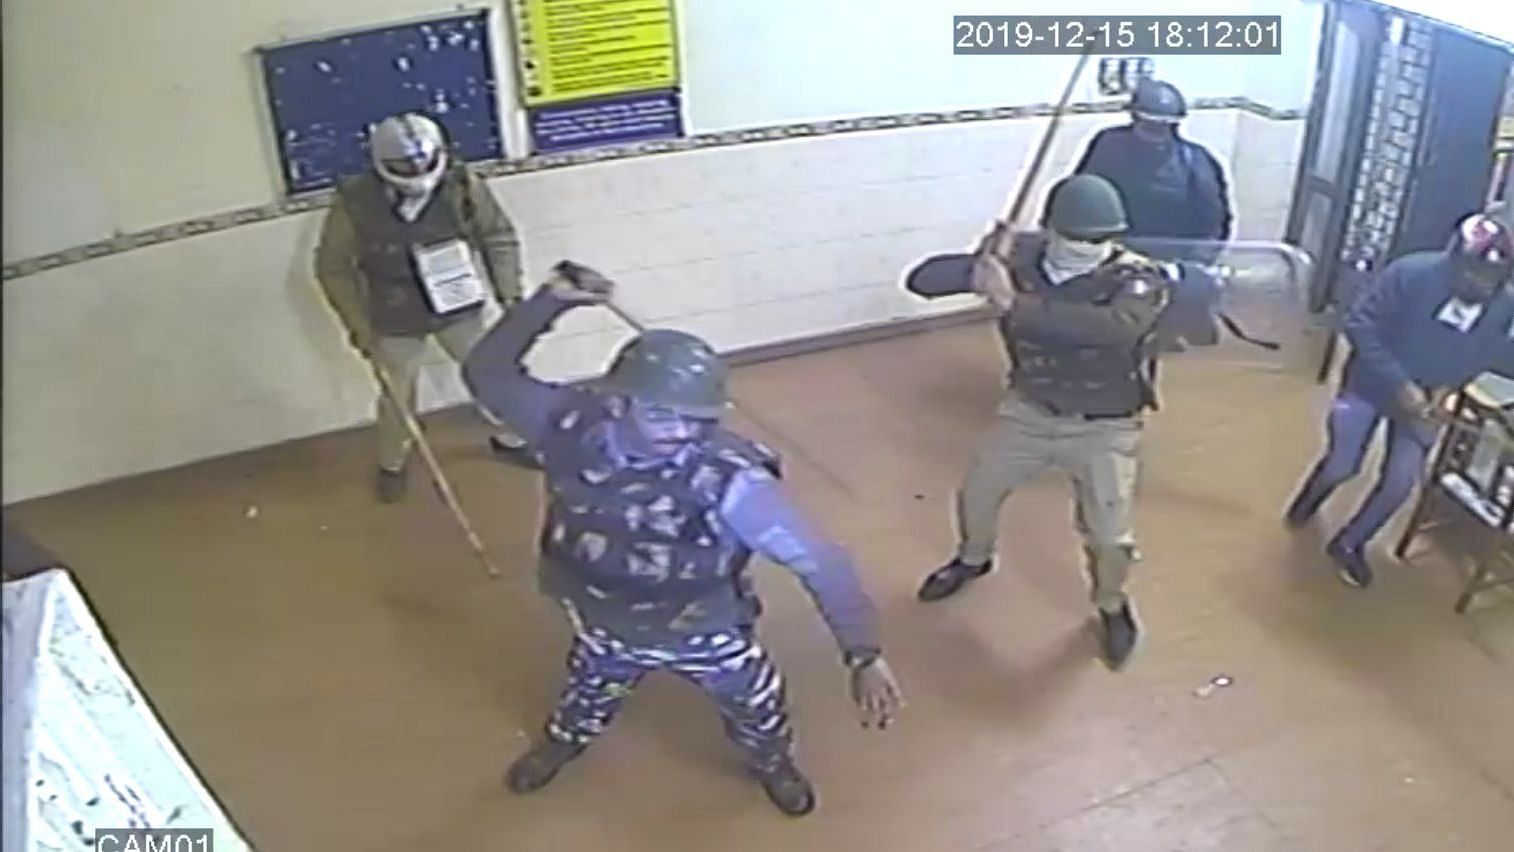 Armed policemen enter the reading hall and beat up students.